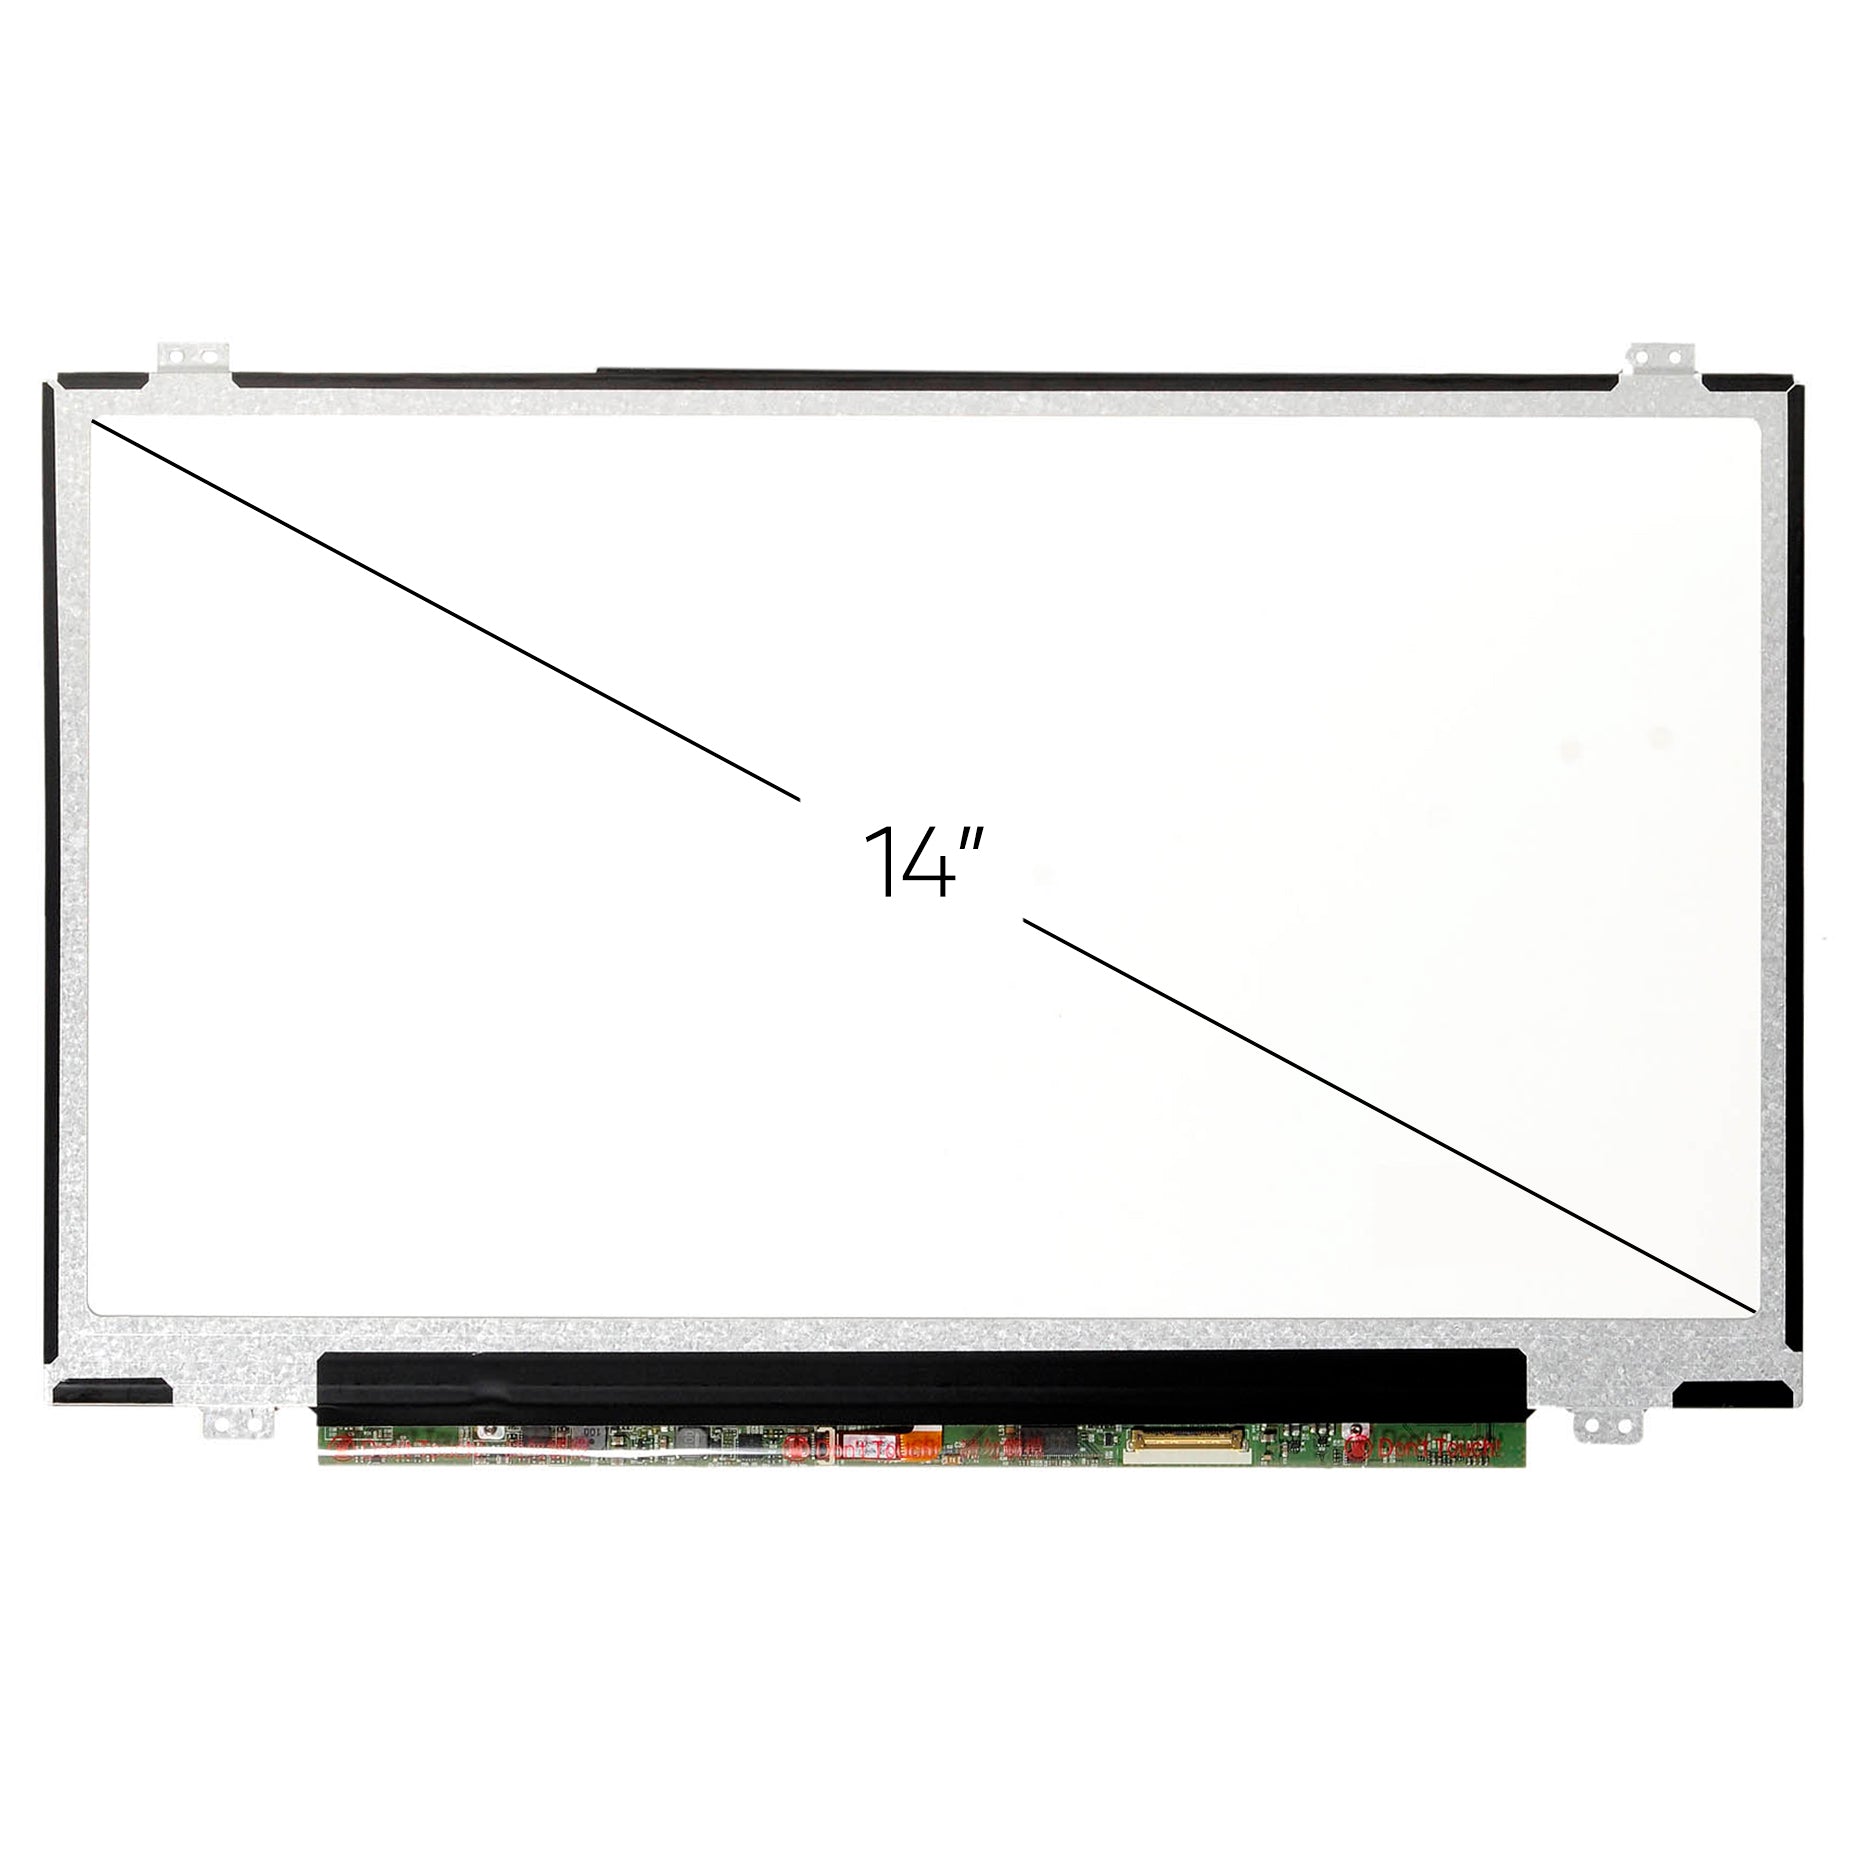 Screen Replacement for Dell Latitude E5450 5450 FHD 1920x1080 Matte LCD LED Display